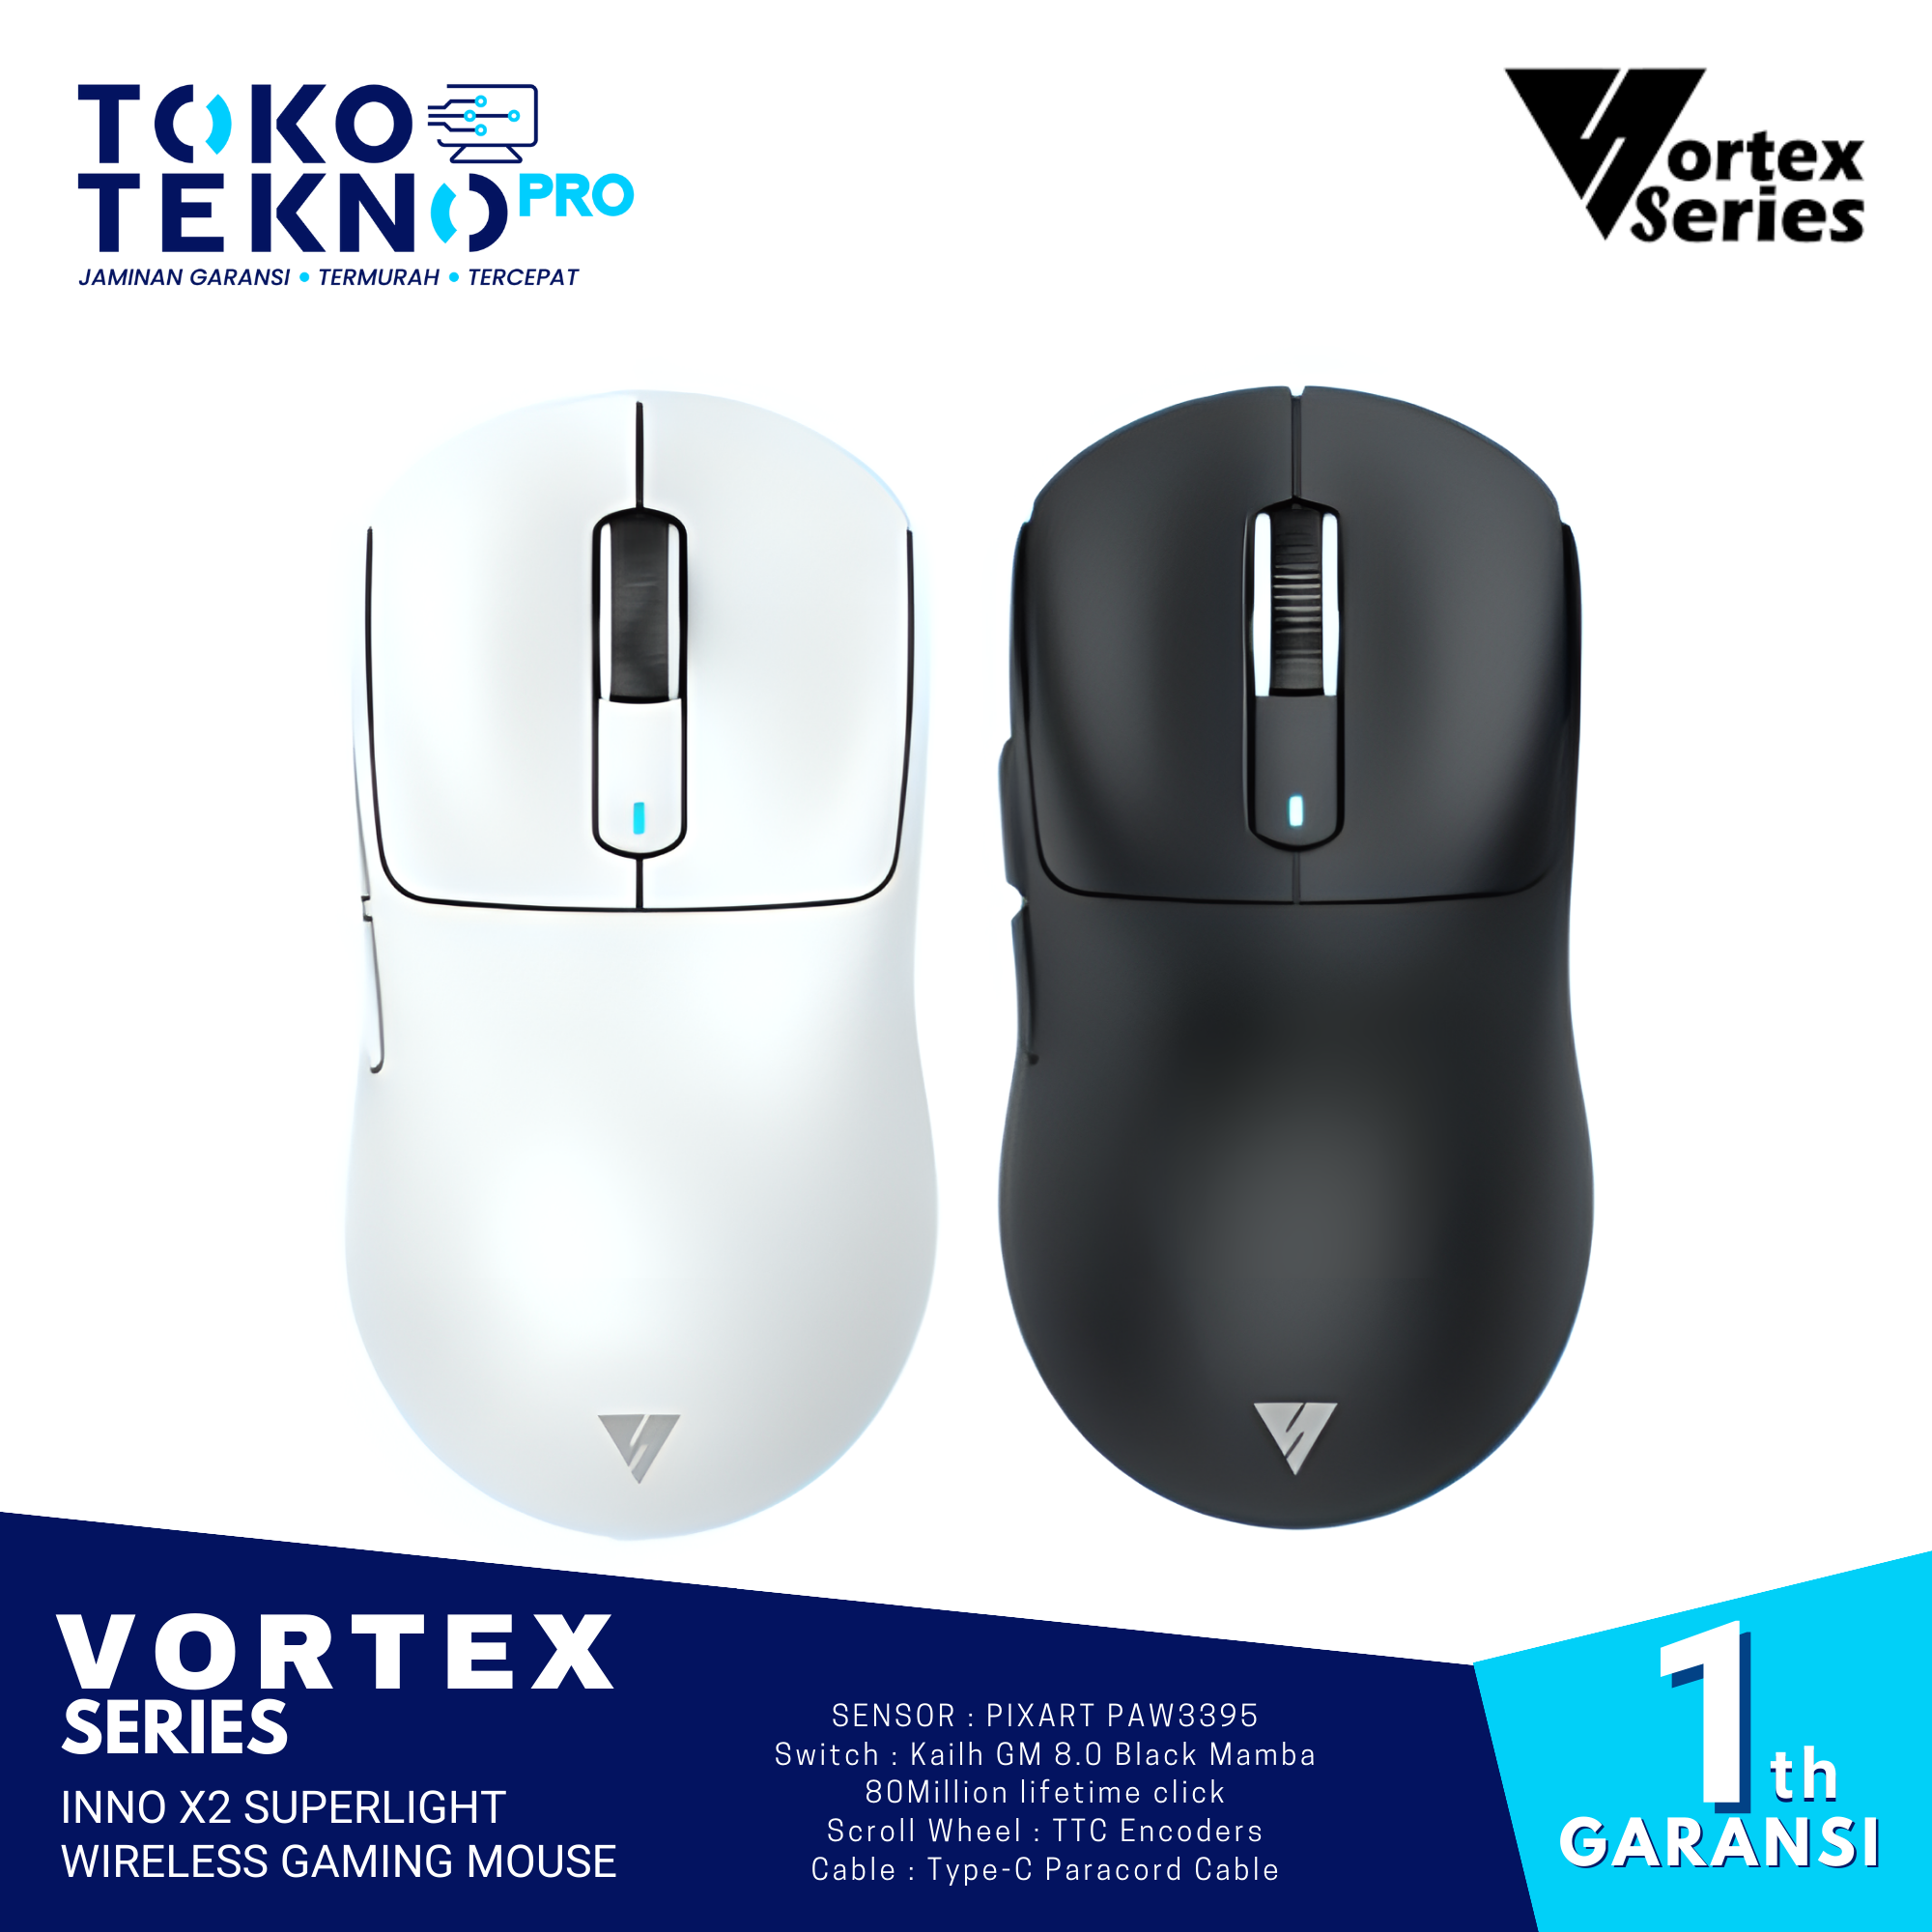 Vortexseries Inno X2 SuperLight Wireless Gaming Mouse